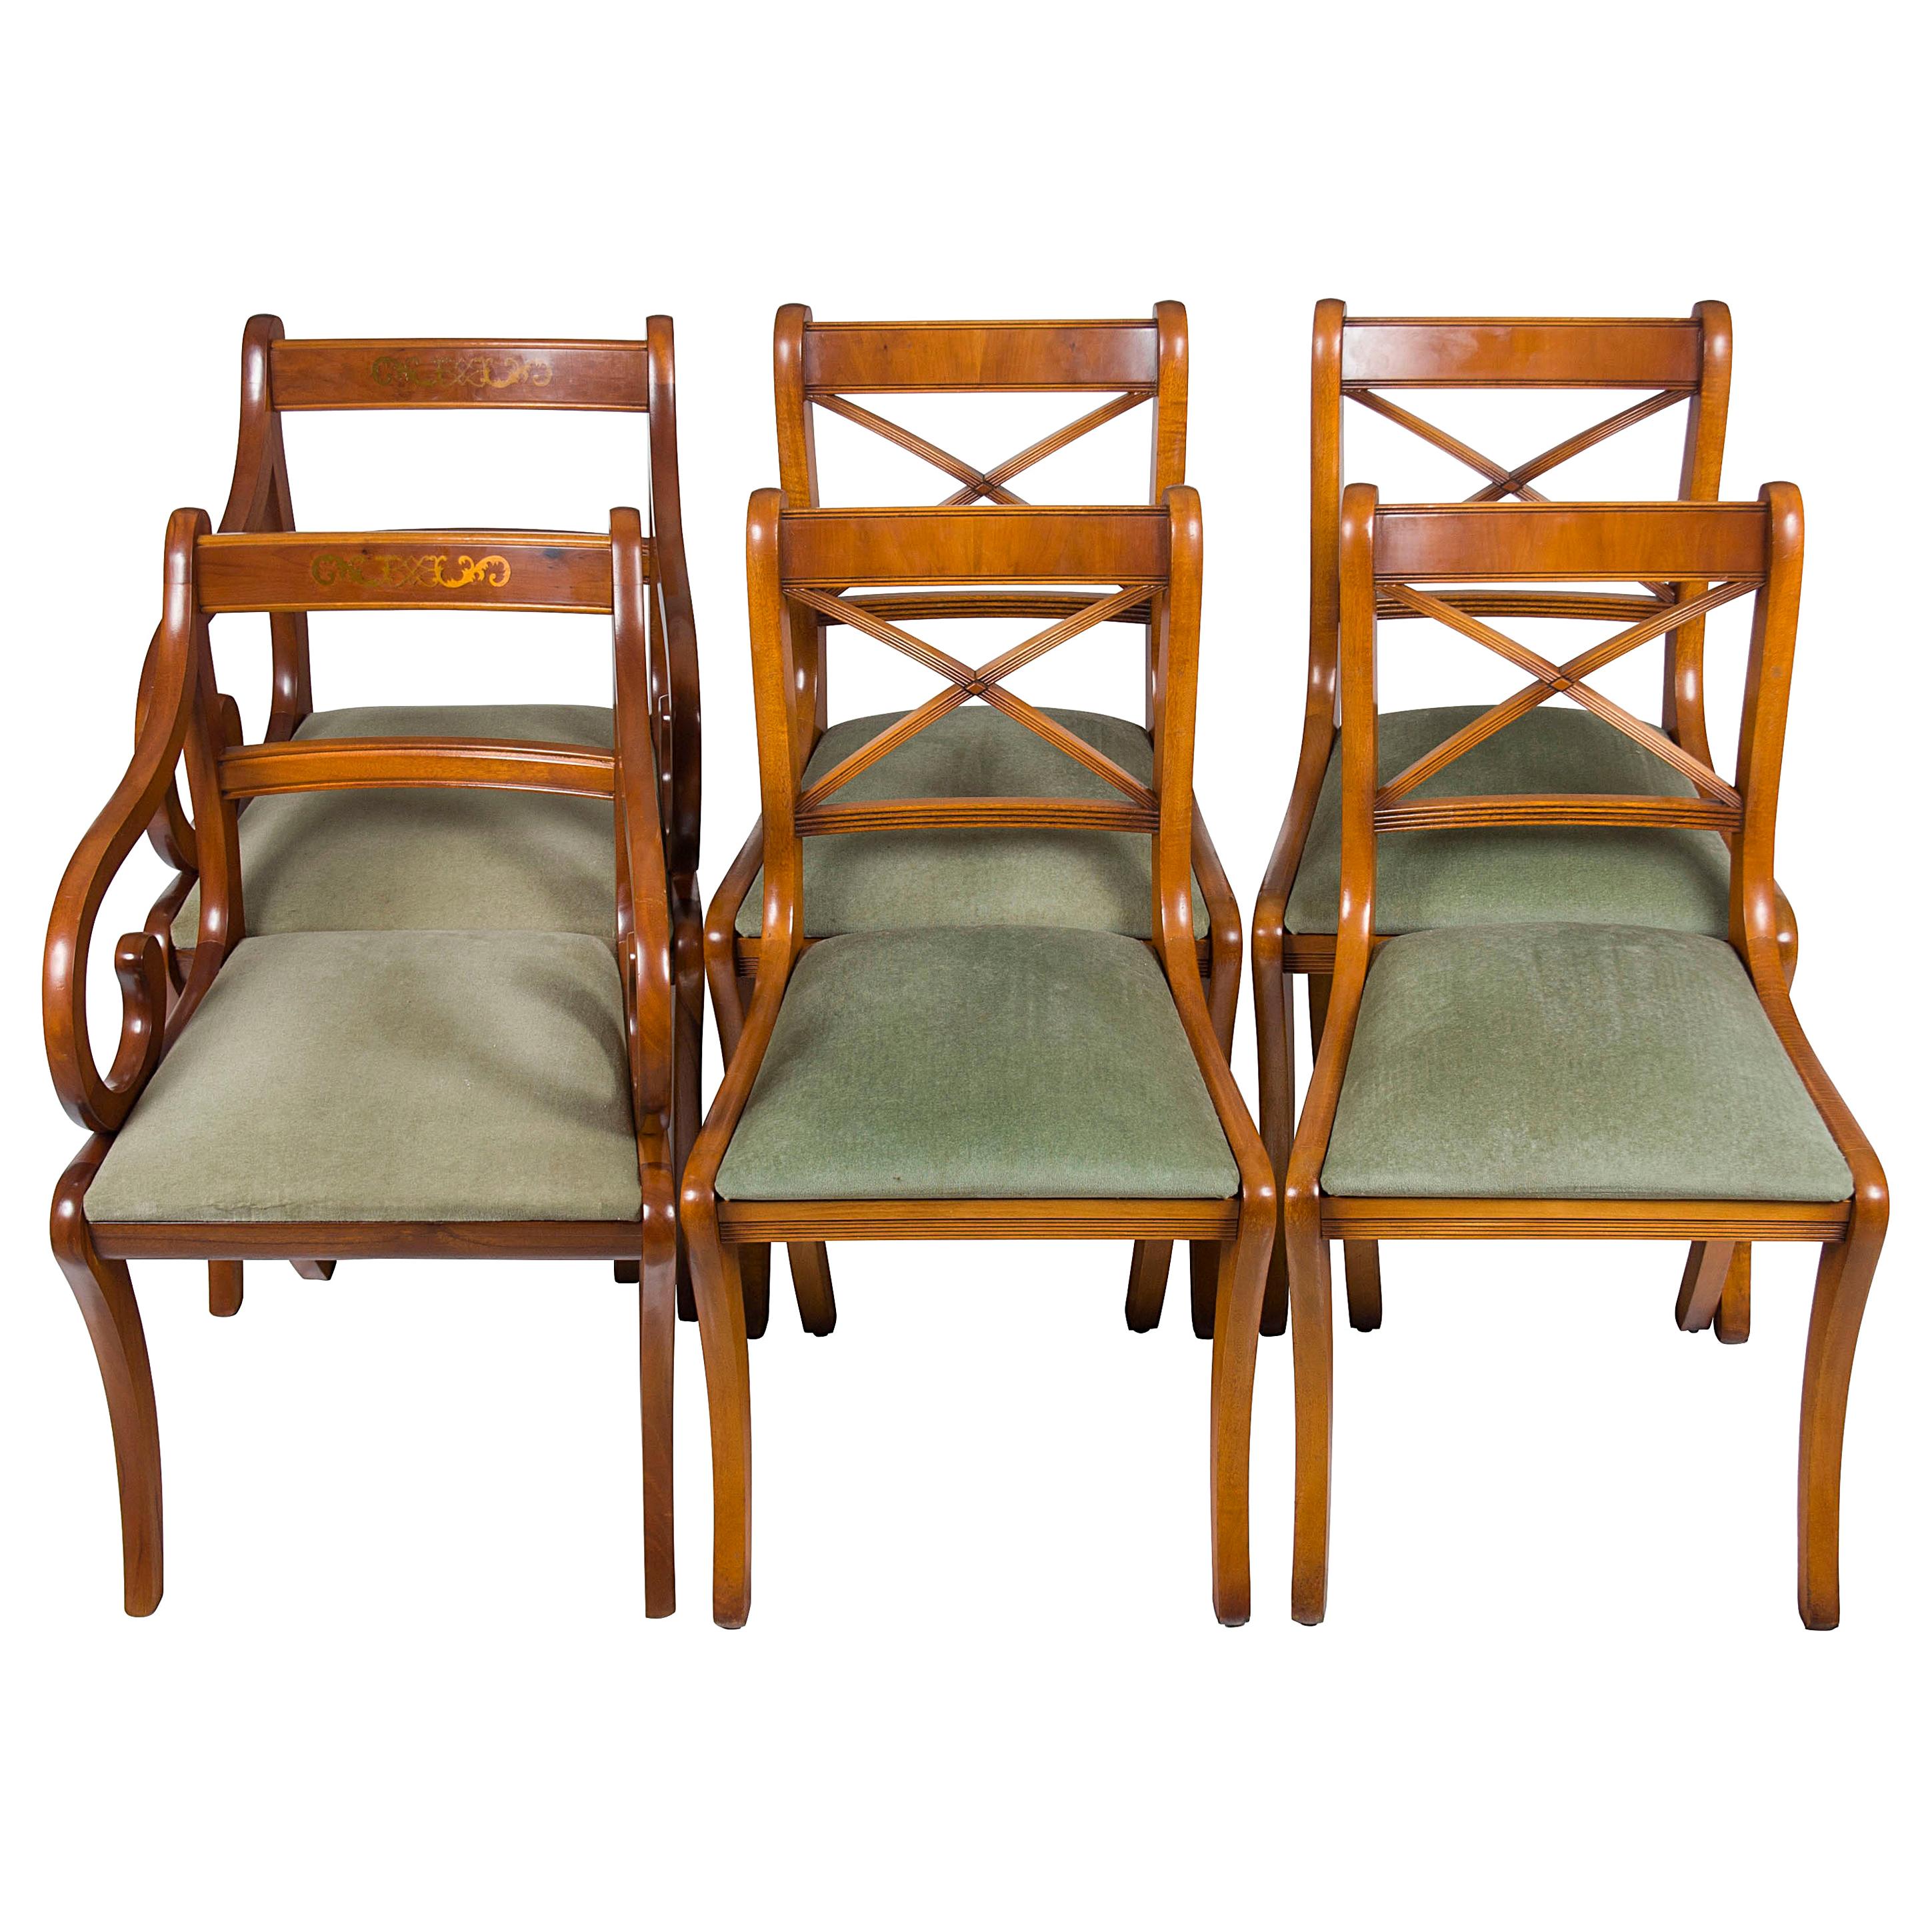 Set of Six Regency Style Yew Wood Dining Room Chairs For Sale